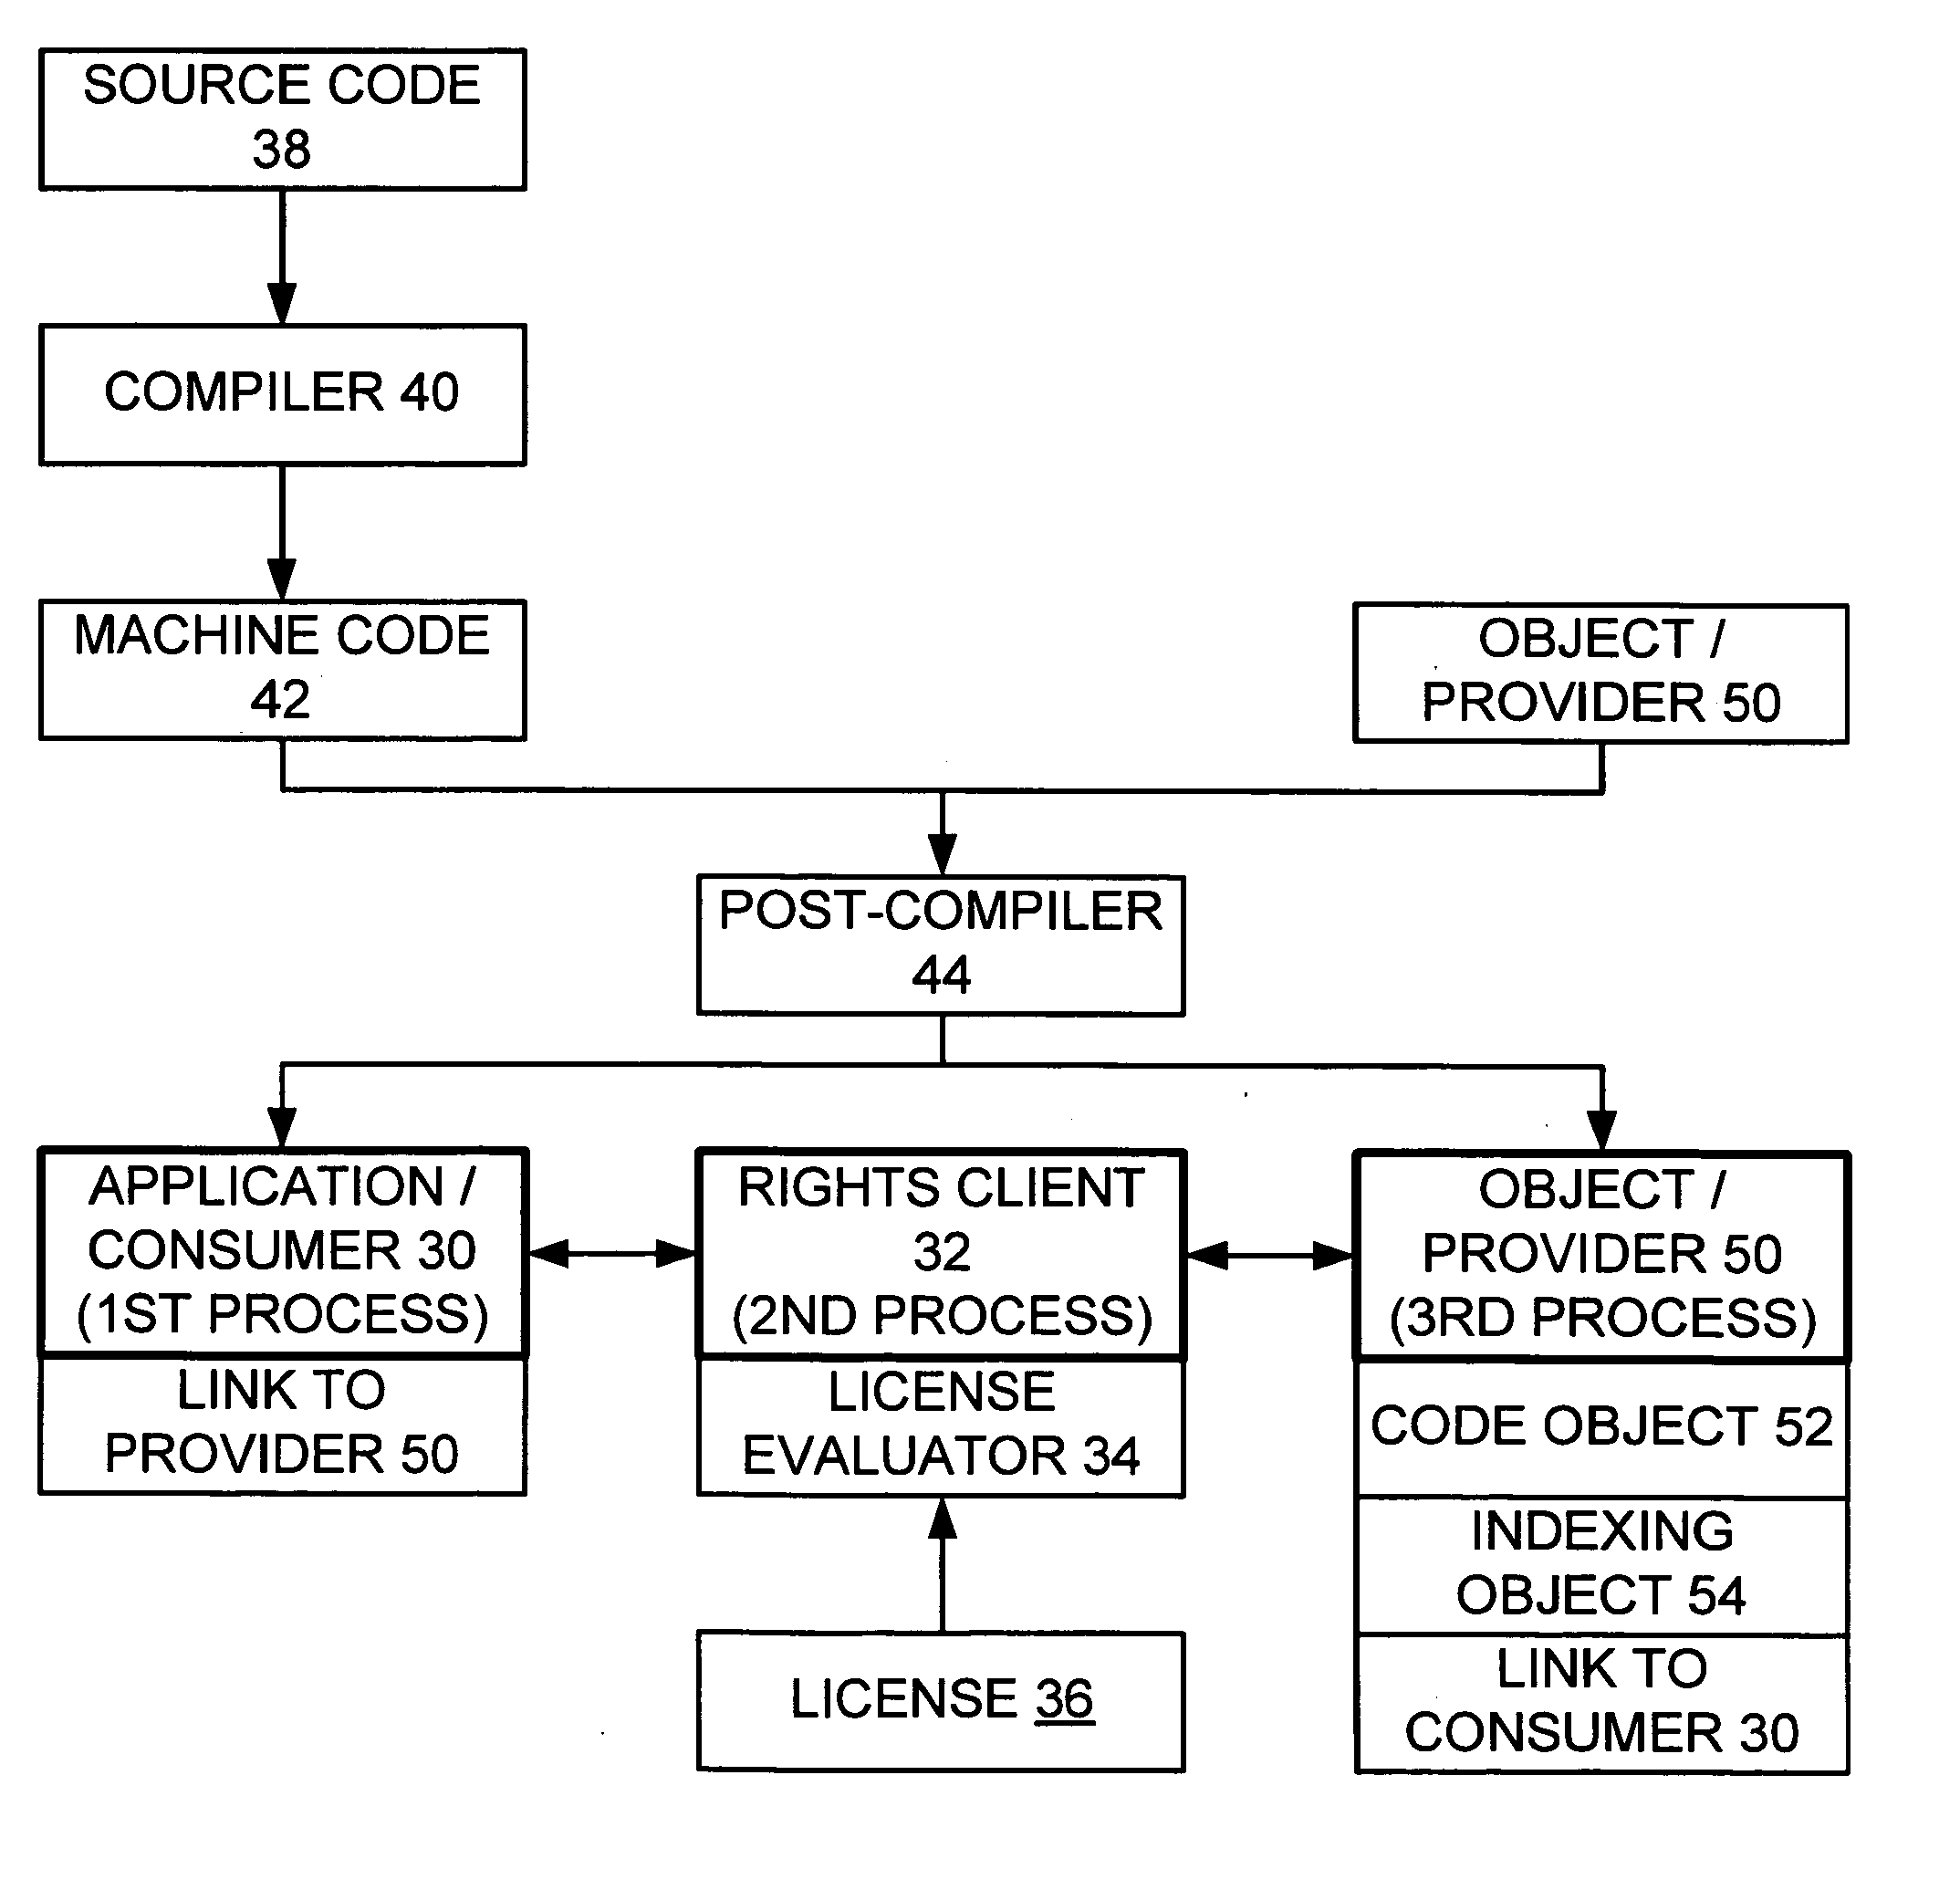 First computer process and second computer process proxy-executing code from third computer process on behalf of first process